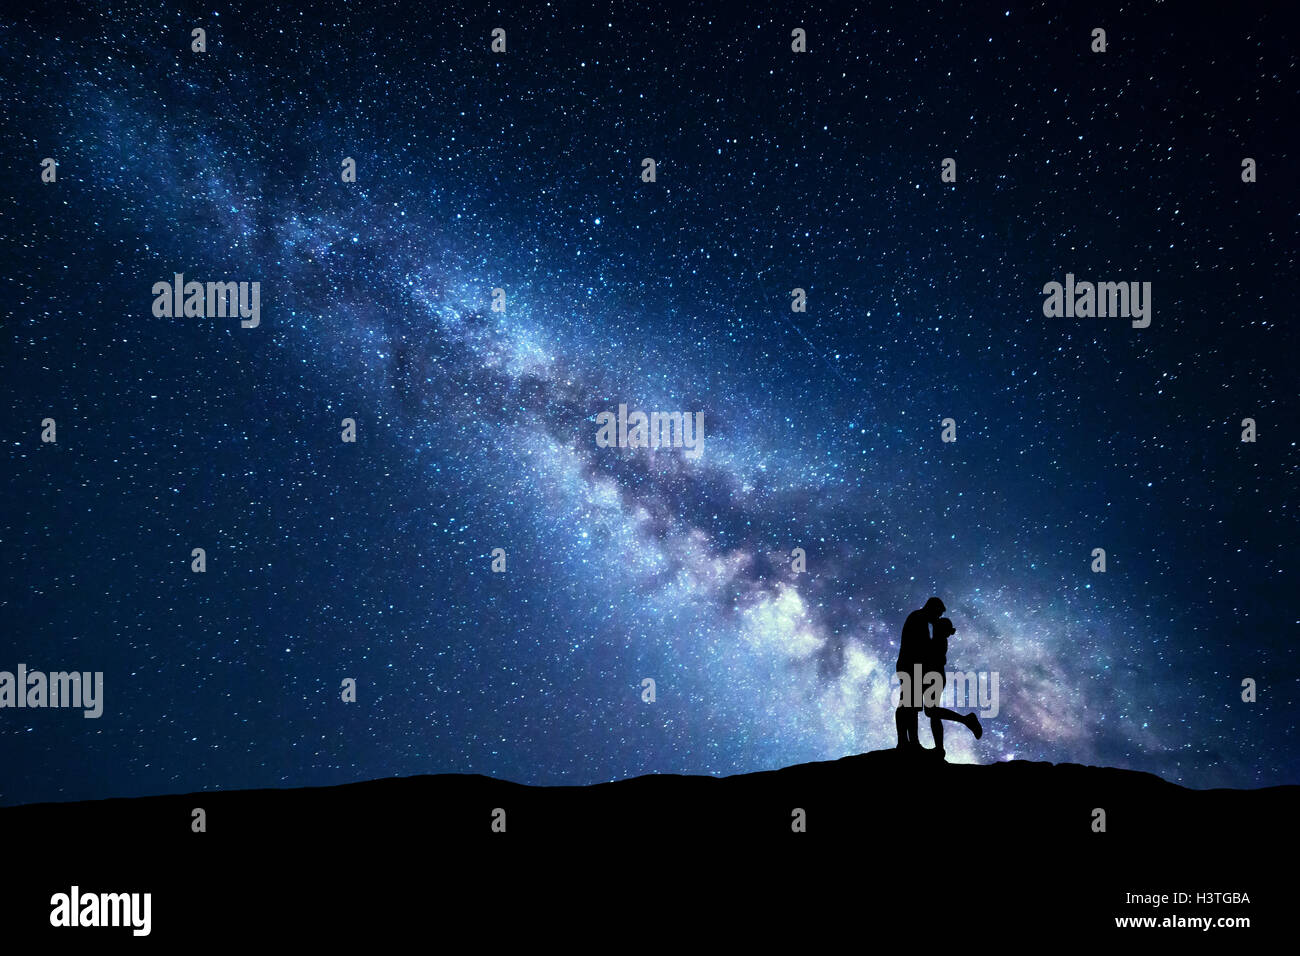 Milky Way. Night landscape with silhouettes of hugging and kissing man and woman on the mountain. Sky with stars. Silhouette of Stock Photo